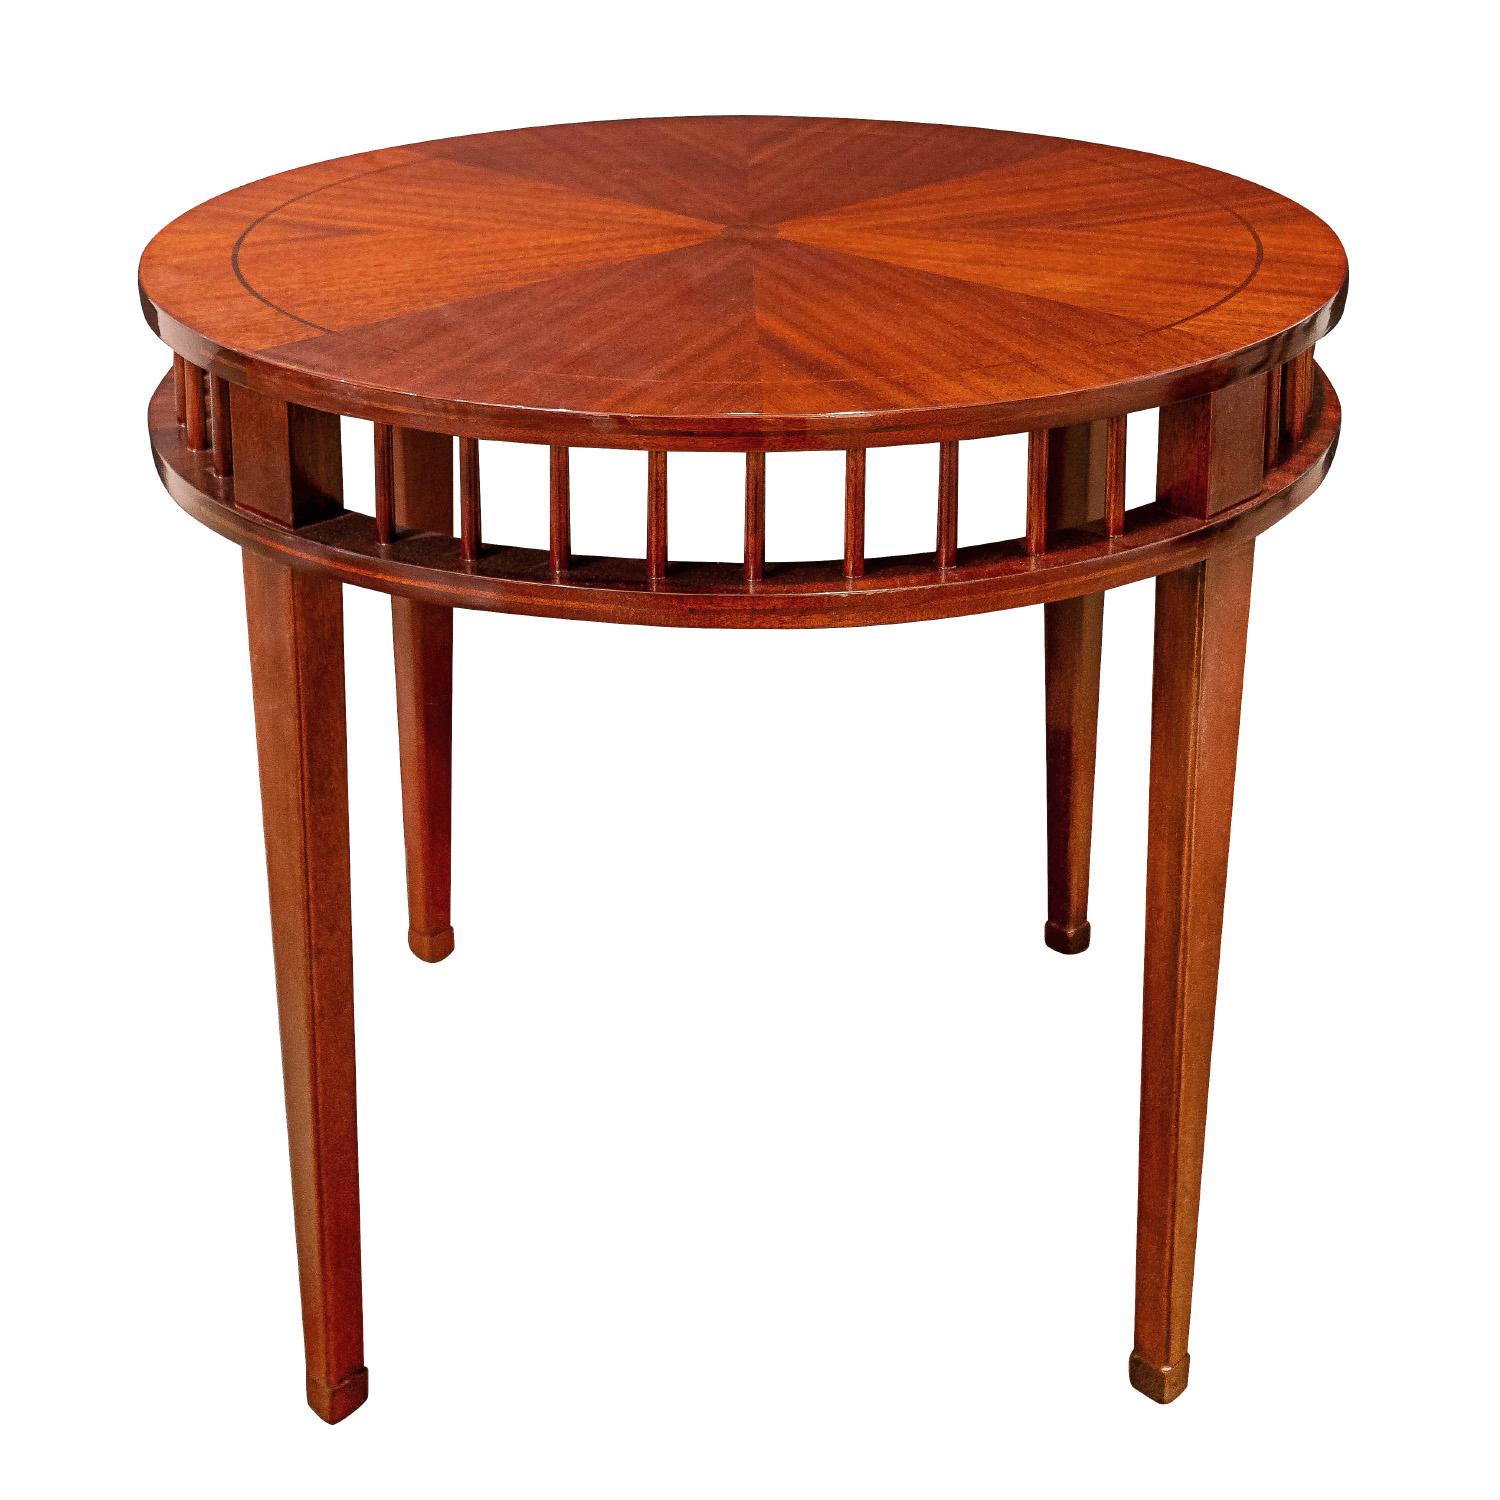 Beautifully crafted round side table with radiating pattern on top in mahogany with inlays by Shelton-Mindel for Luten-Clarey-Stern (LCS), American 1990's.  This table is stunning.